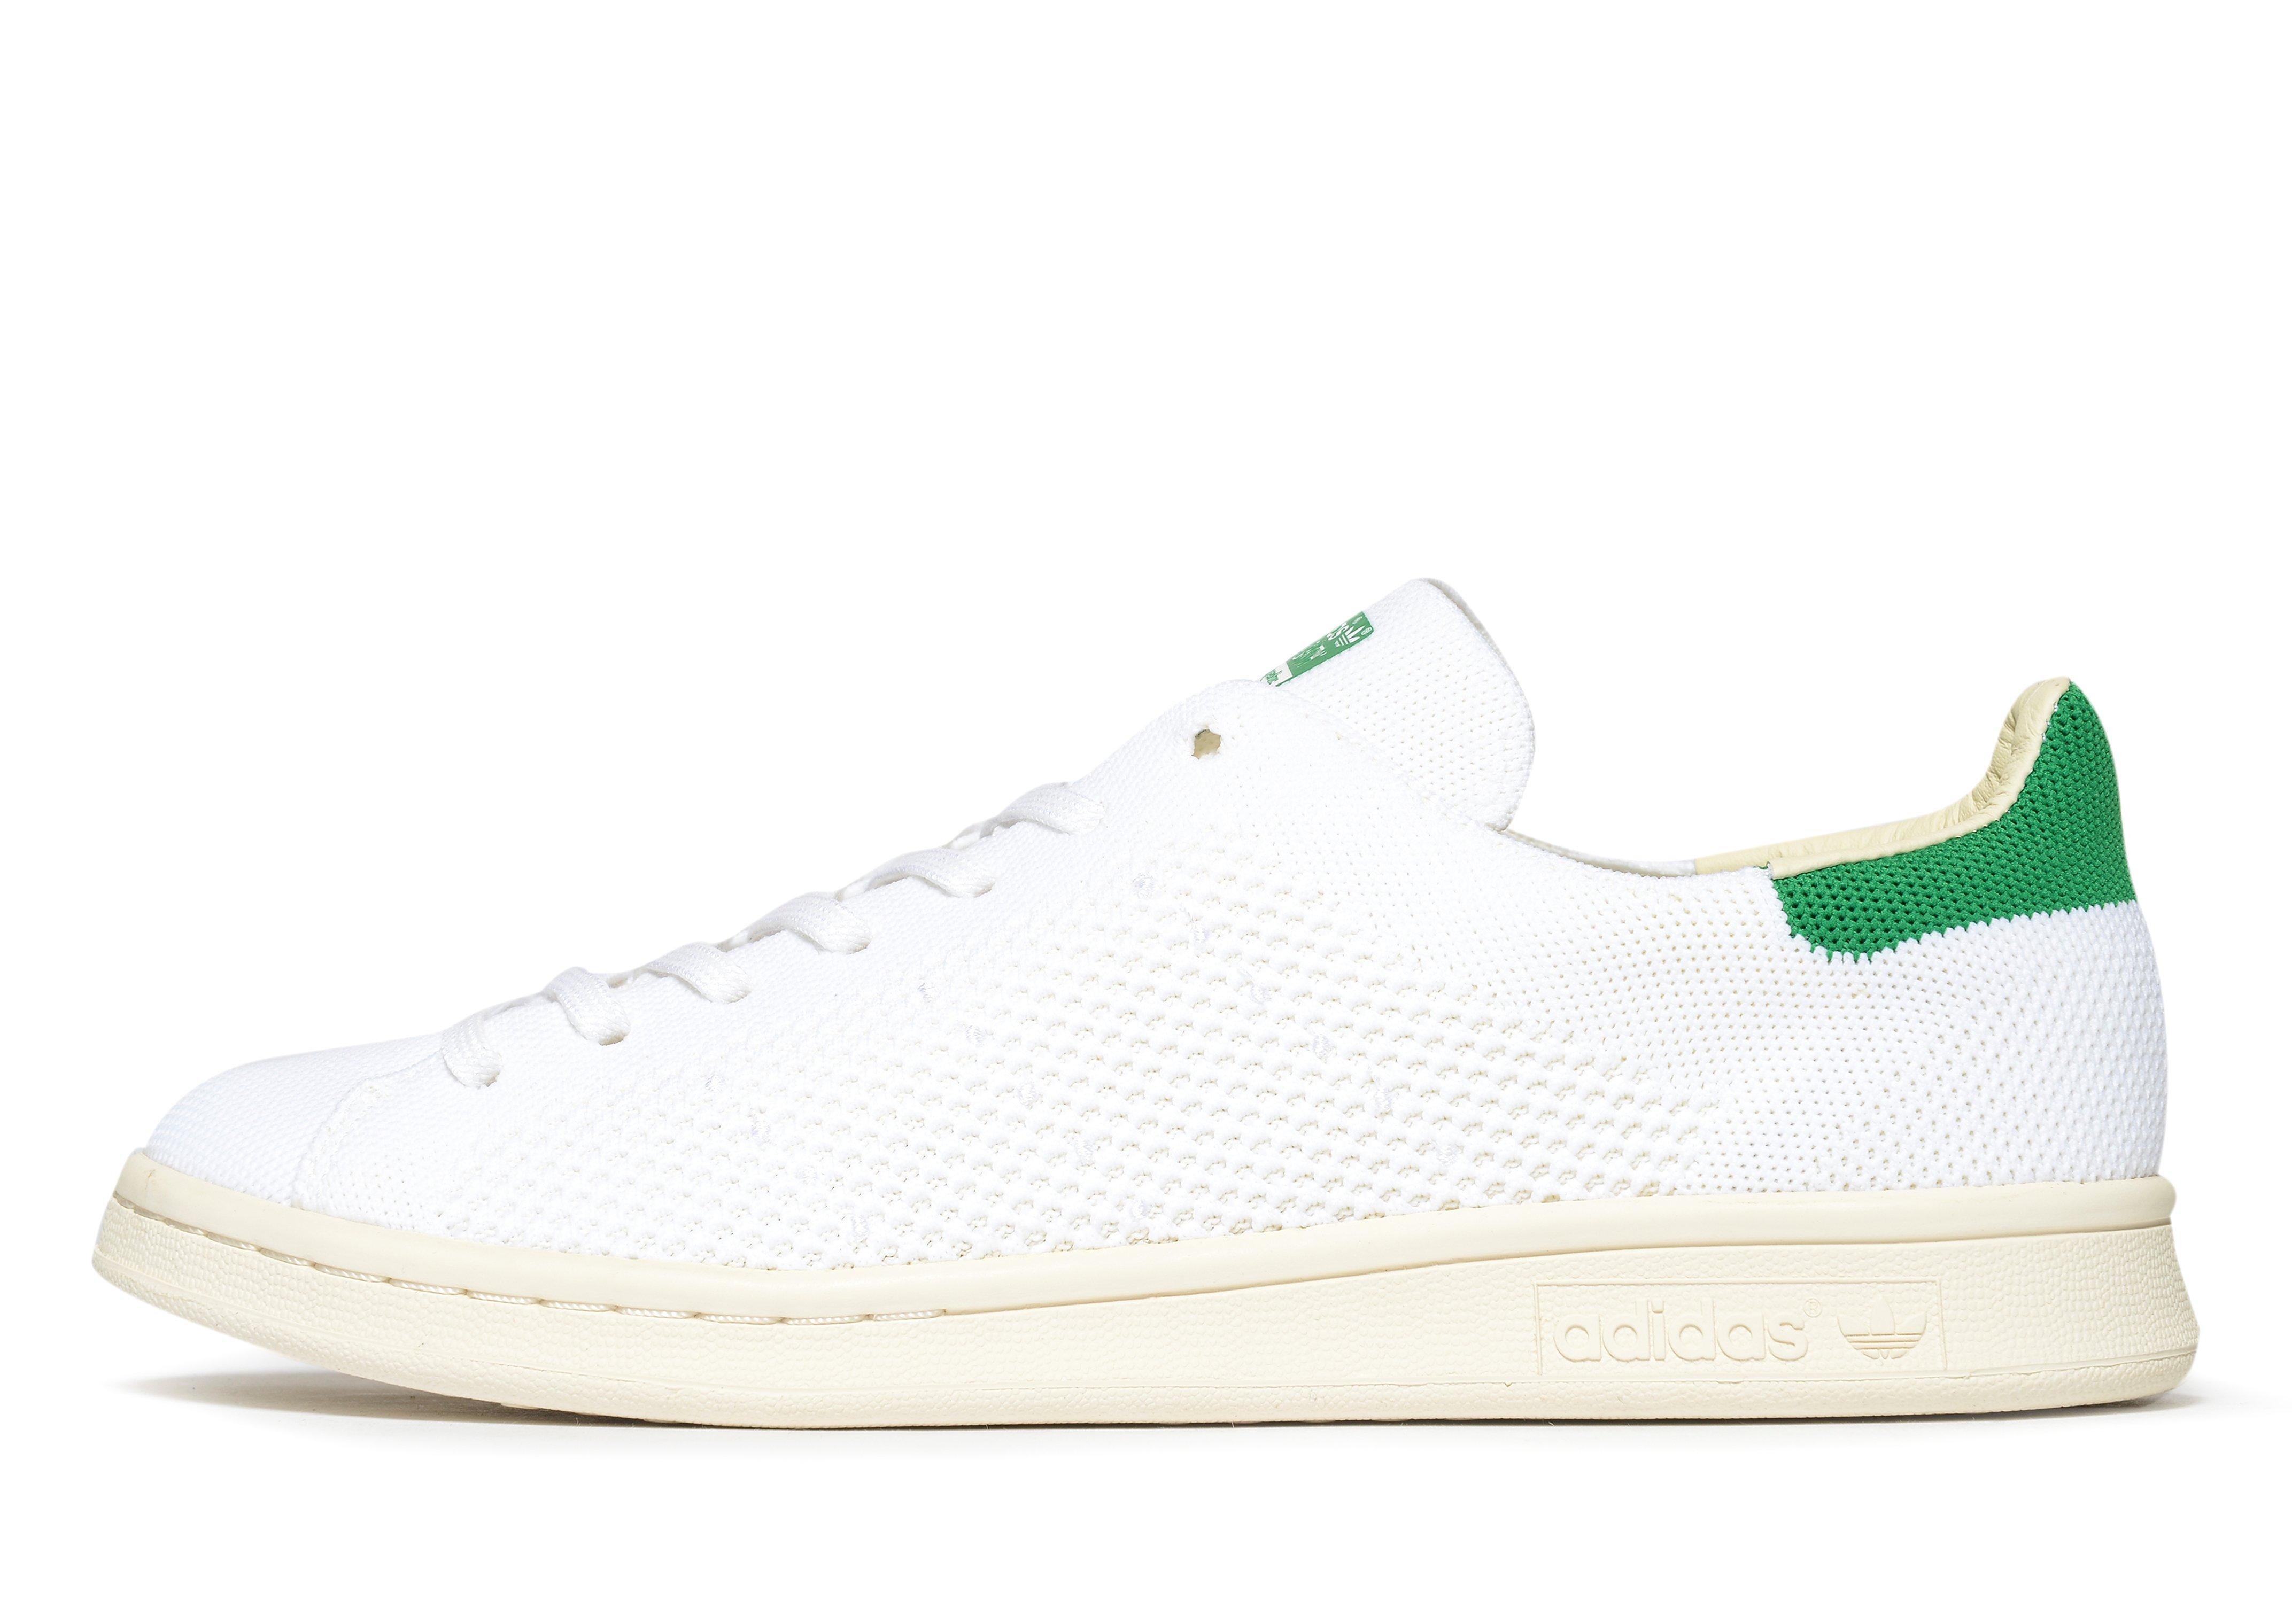 adidas Synthetic Stan Smith Primeknit in White for Men - Lyst